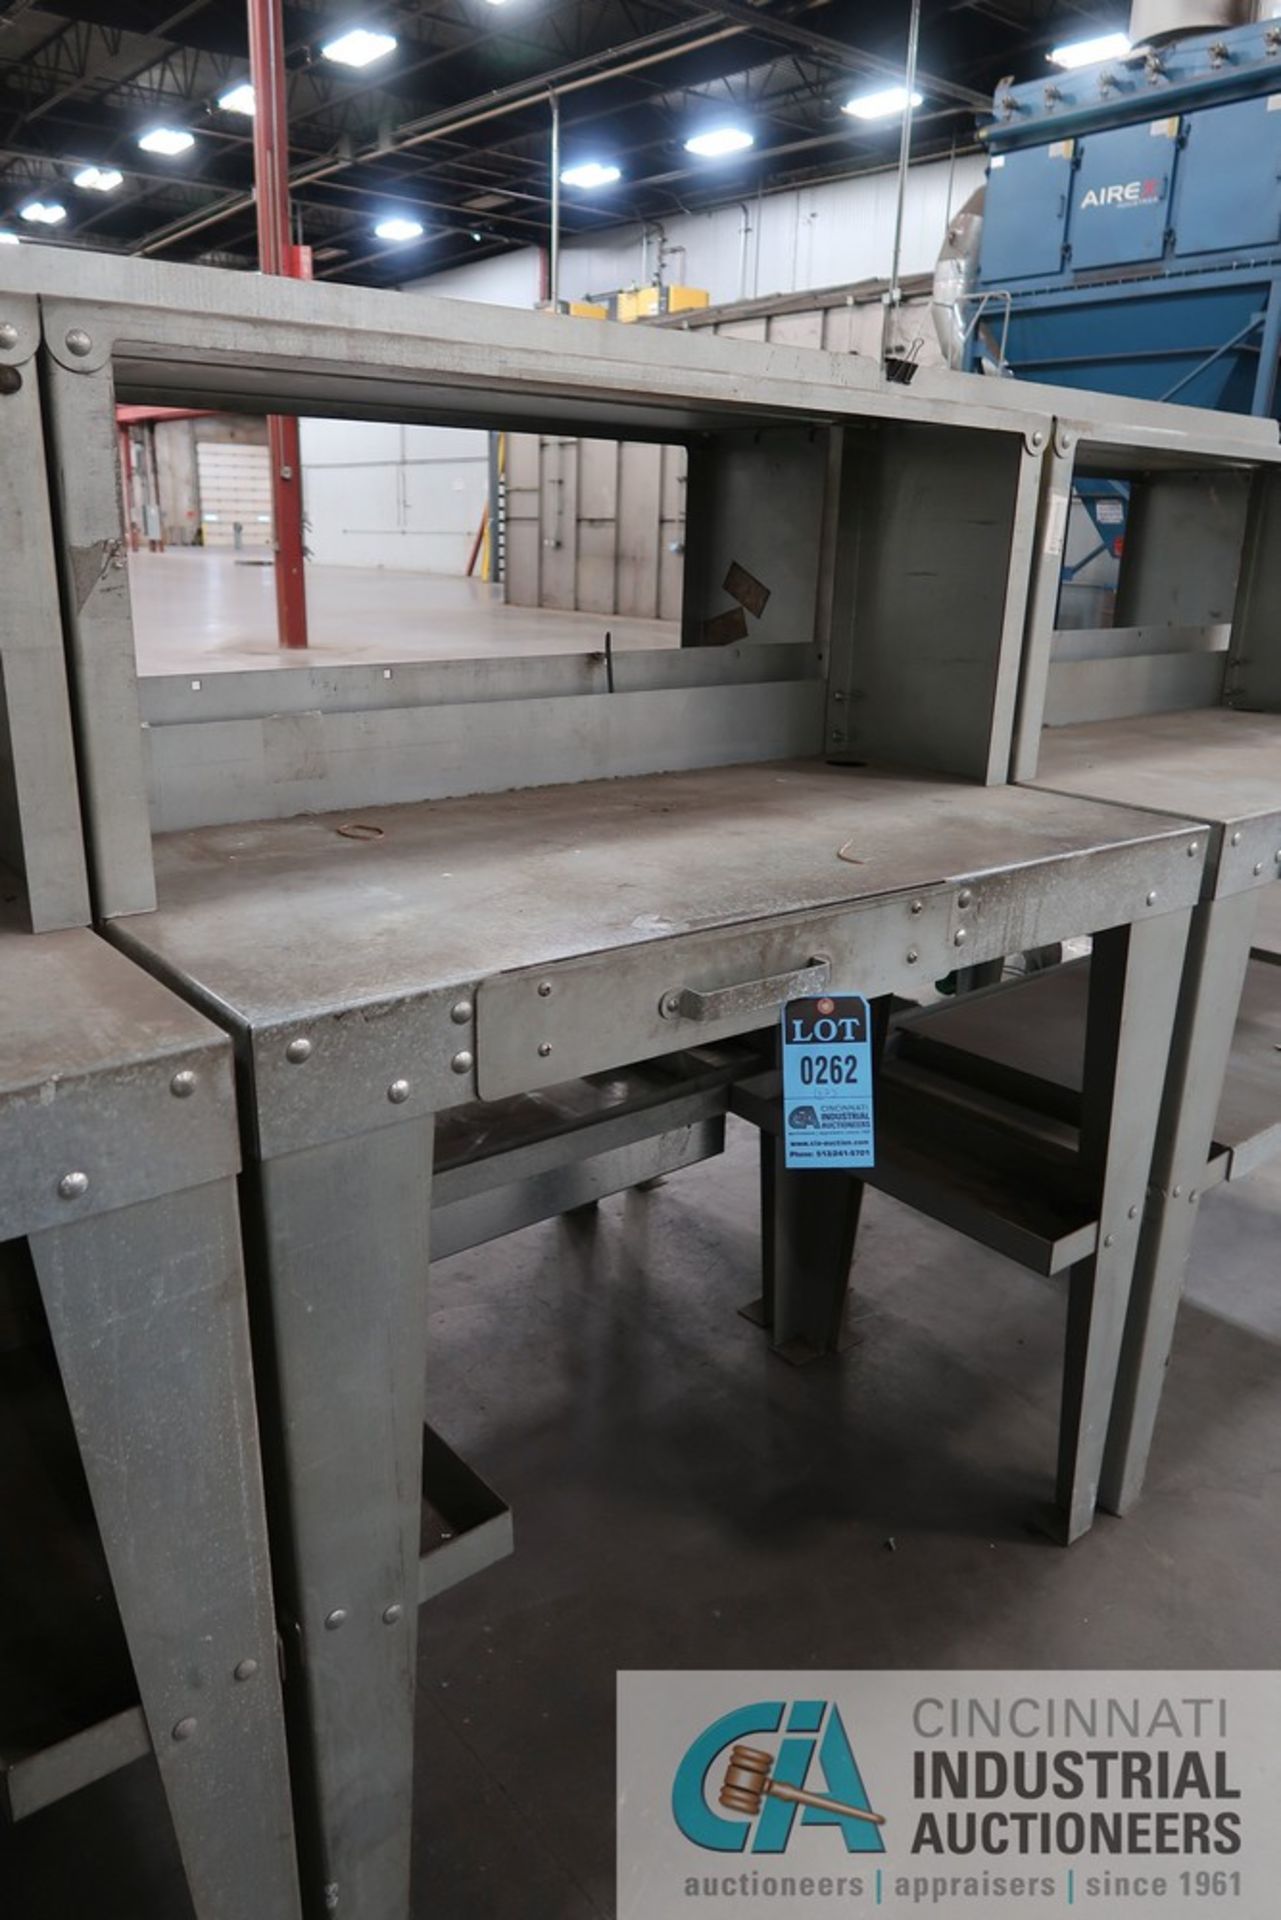 24" X 48" X 42" HIGH HEAVY DUTY GALVANIZED STEEL BOLT TOGETHER WORKBENCHES WITH 12" X 19" HIGH